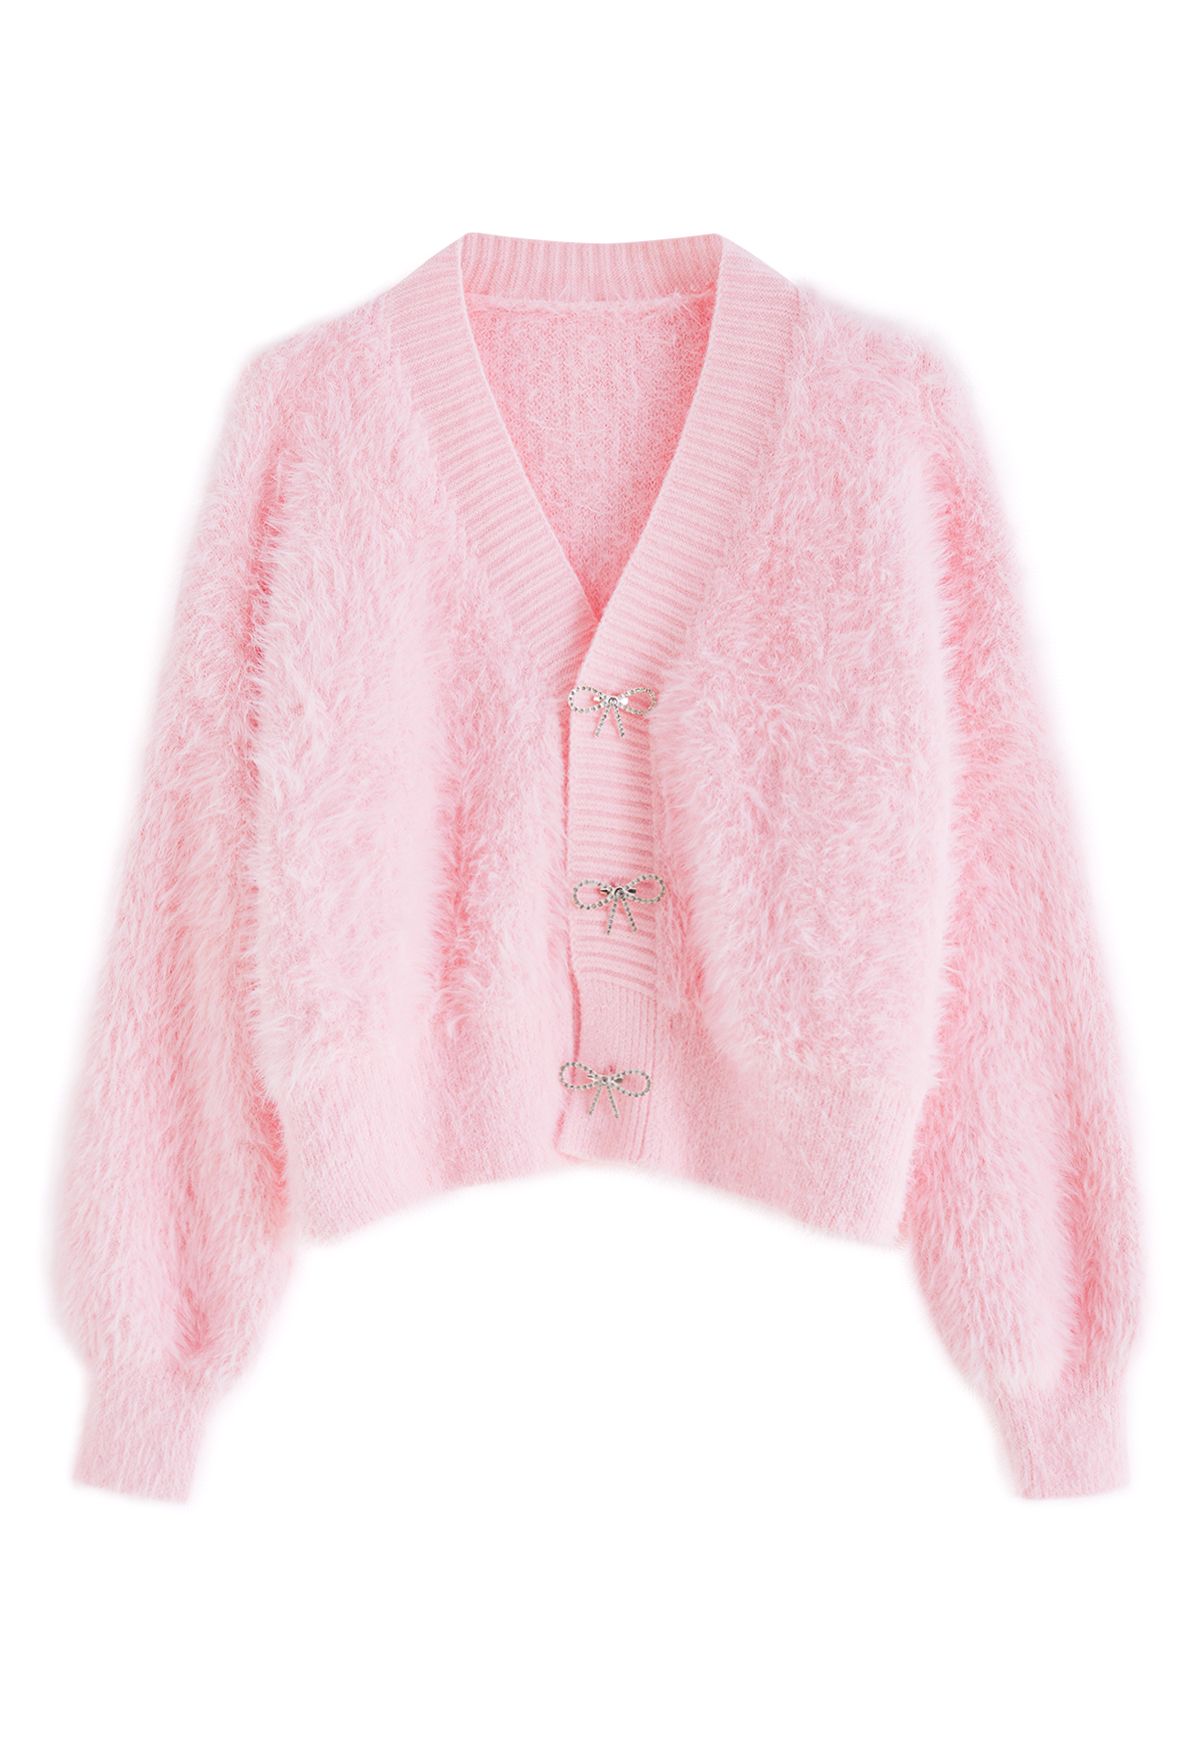 Bowknot Brooch Fuzzy Knit Cardigan in Pink - Retro, Indie and Unique Fashion